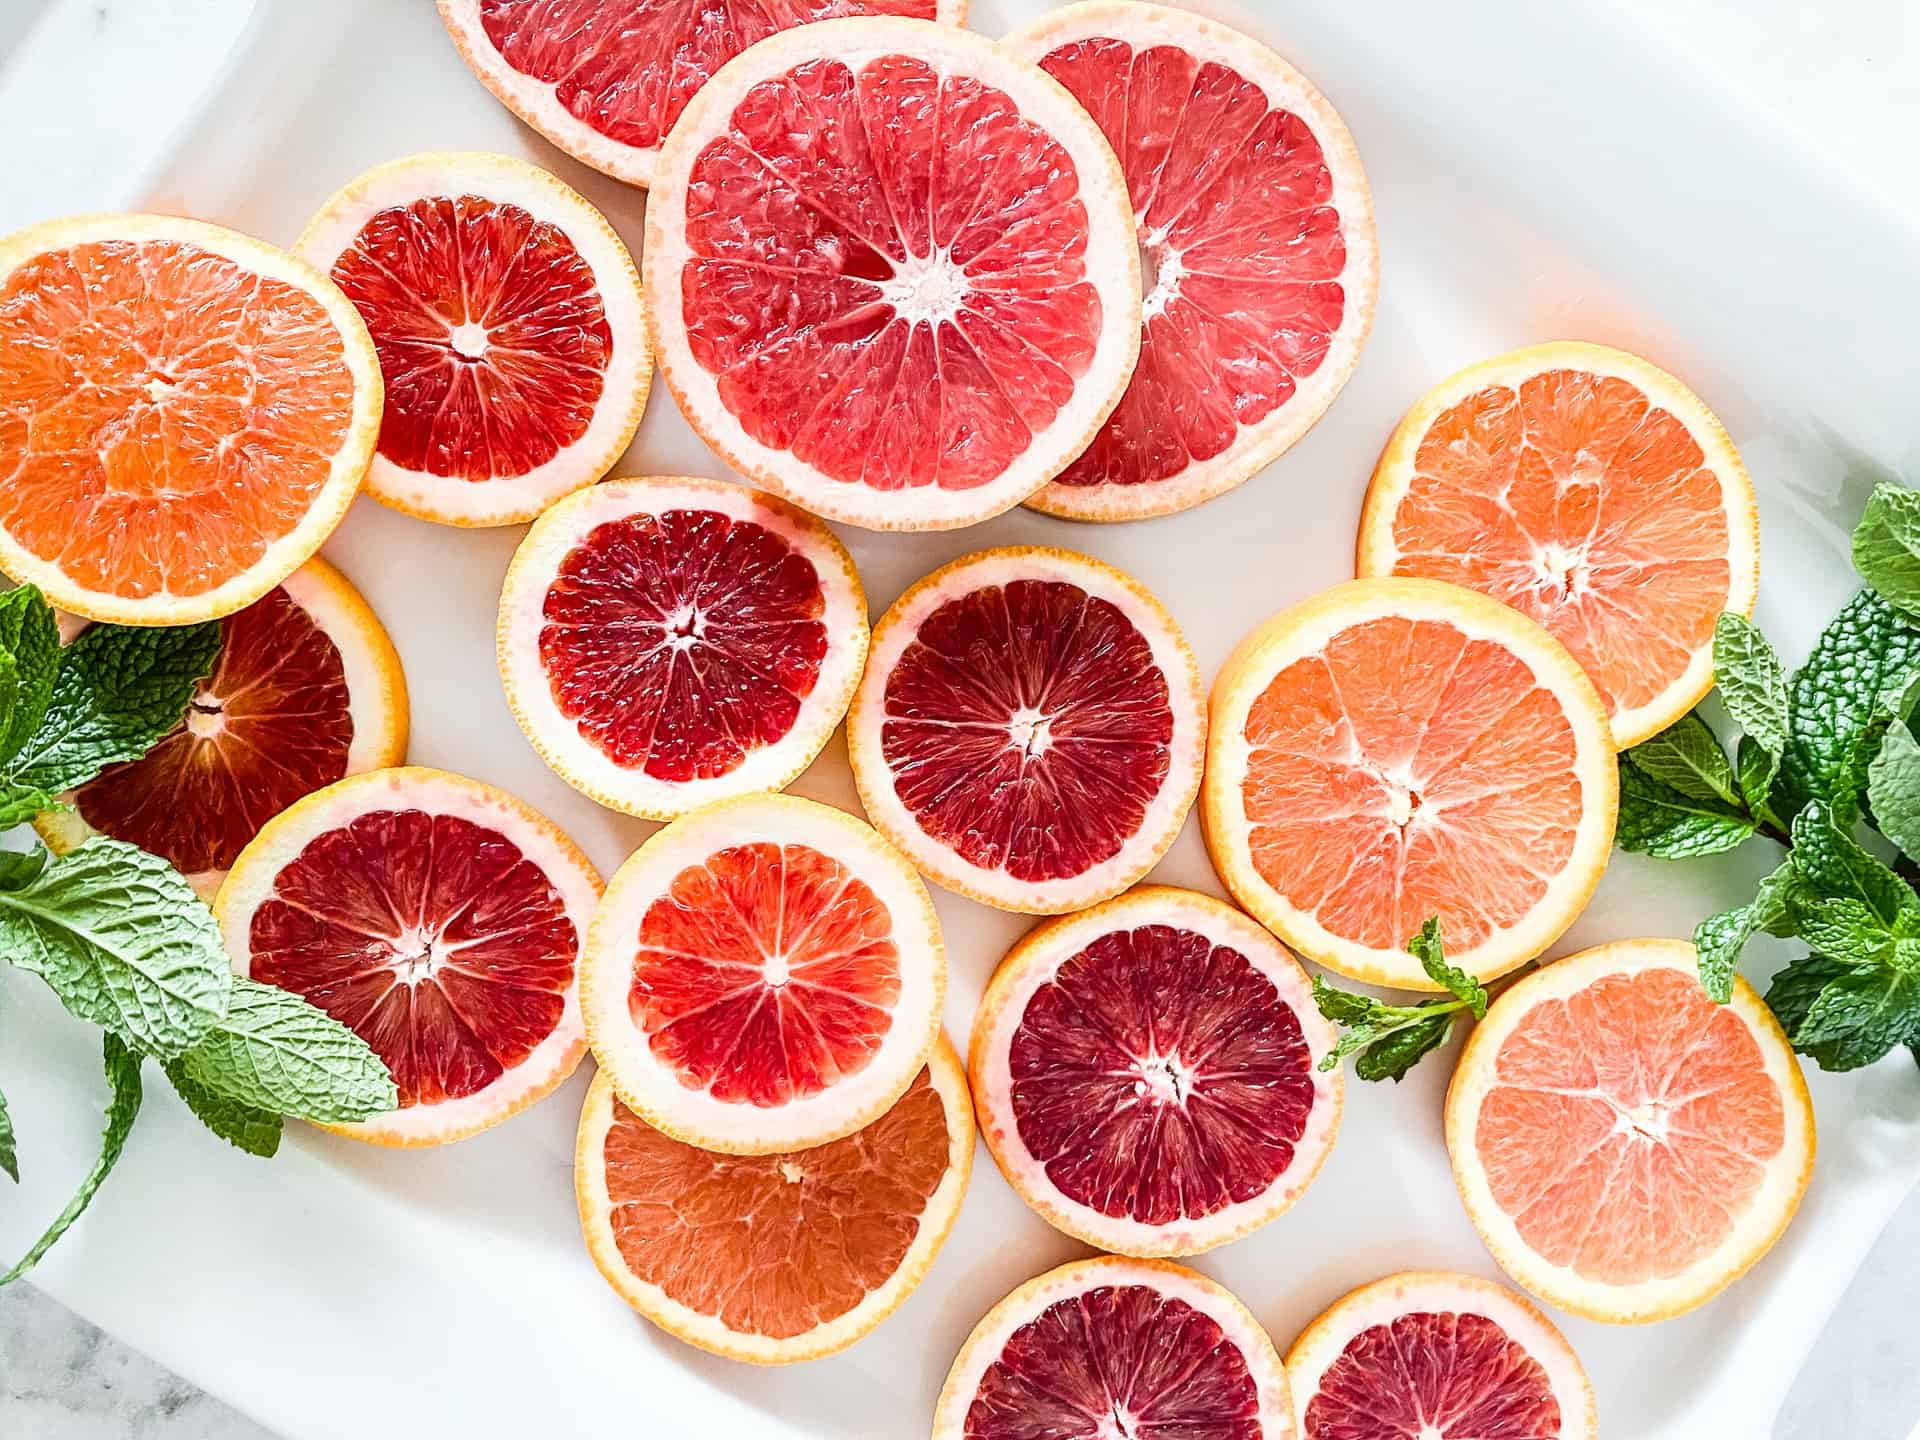 What properties does a grapefruit have?